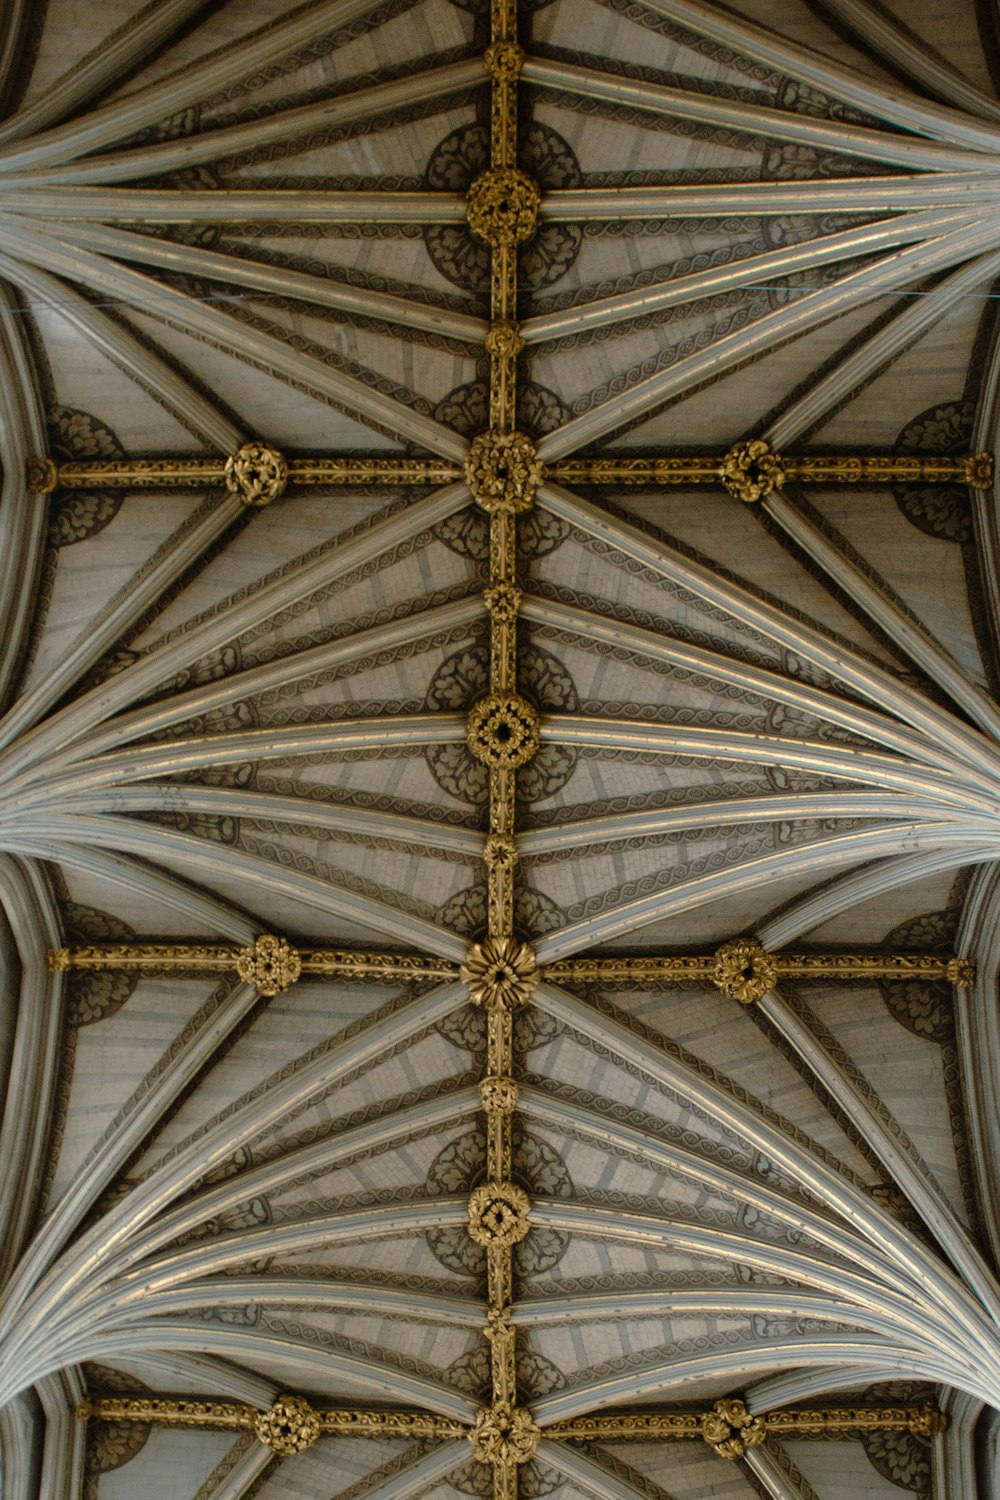 the ceiling of a large cathedral with intricate designs